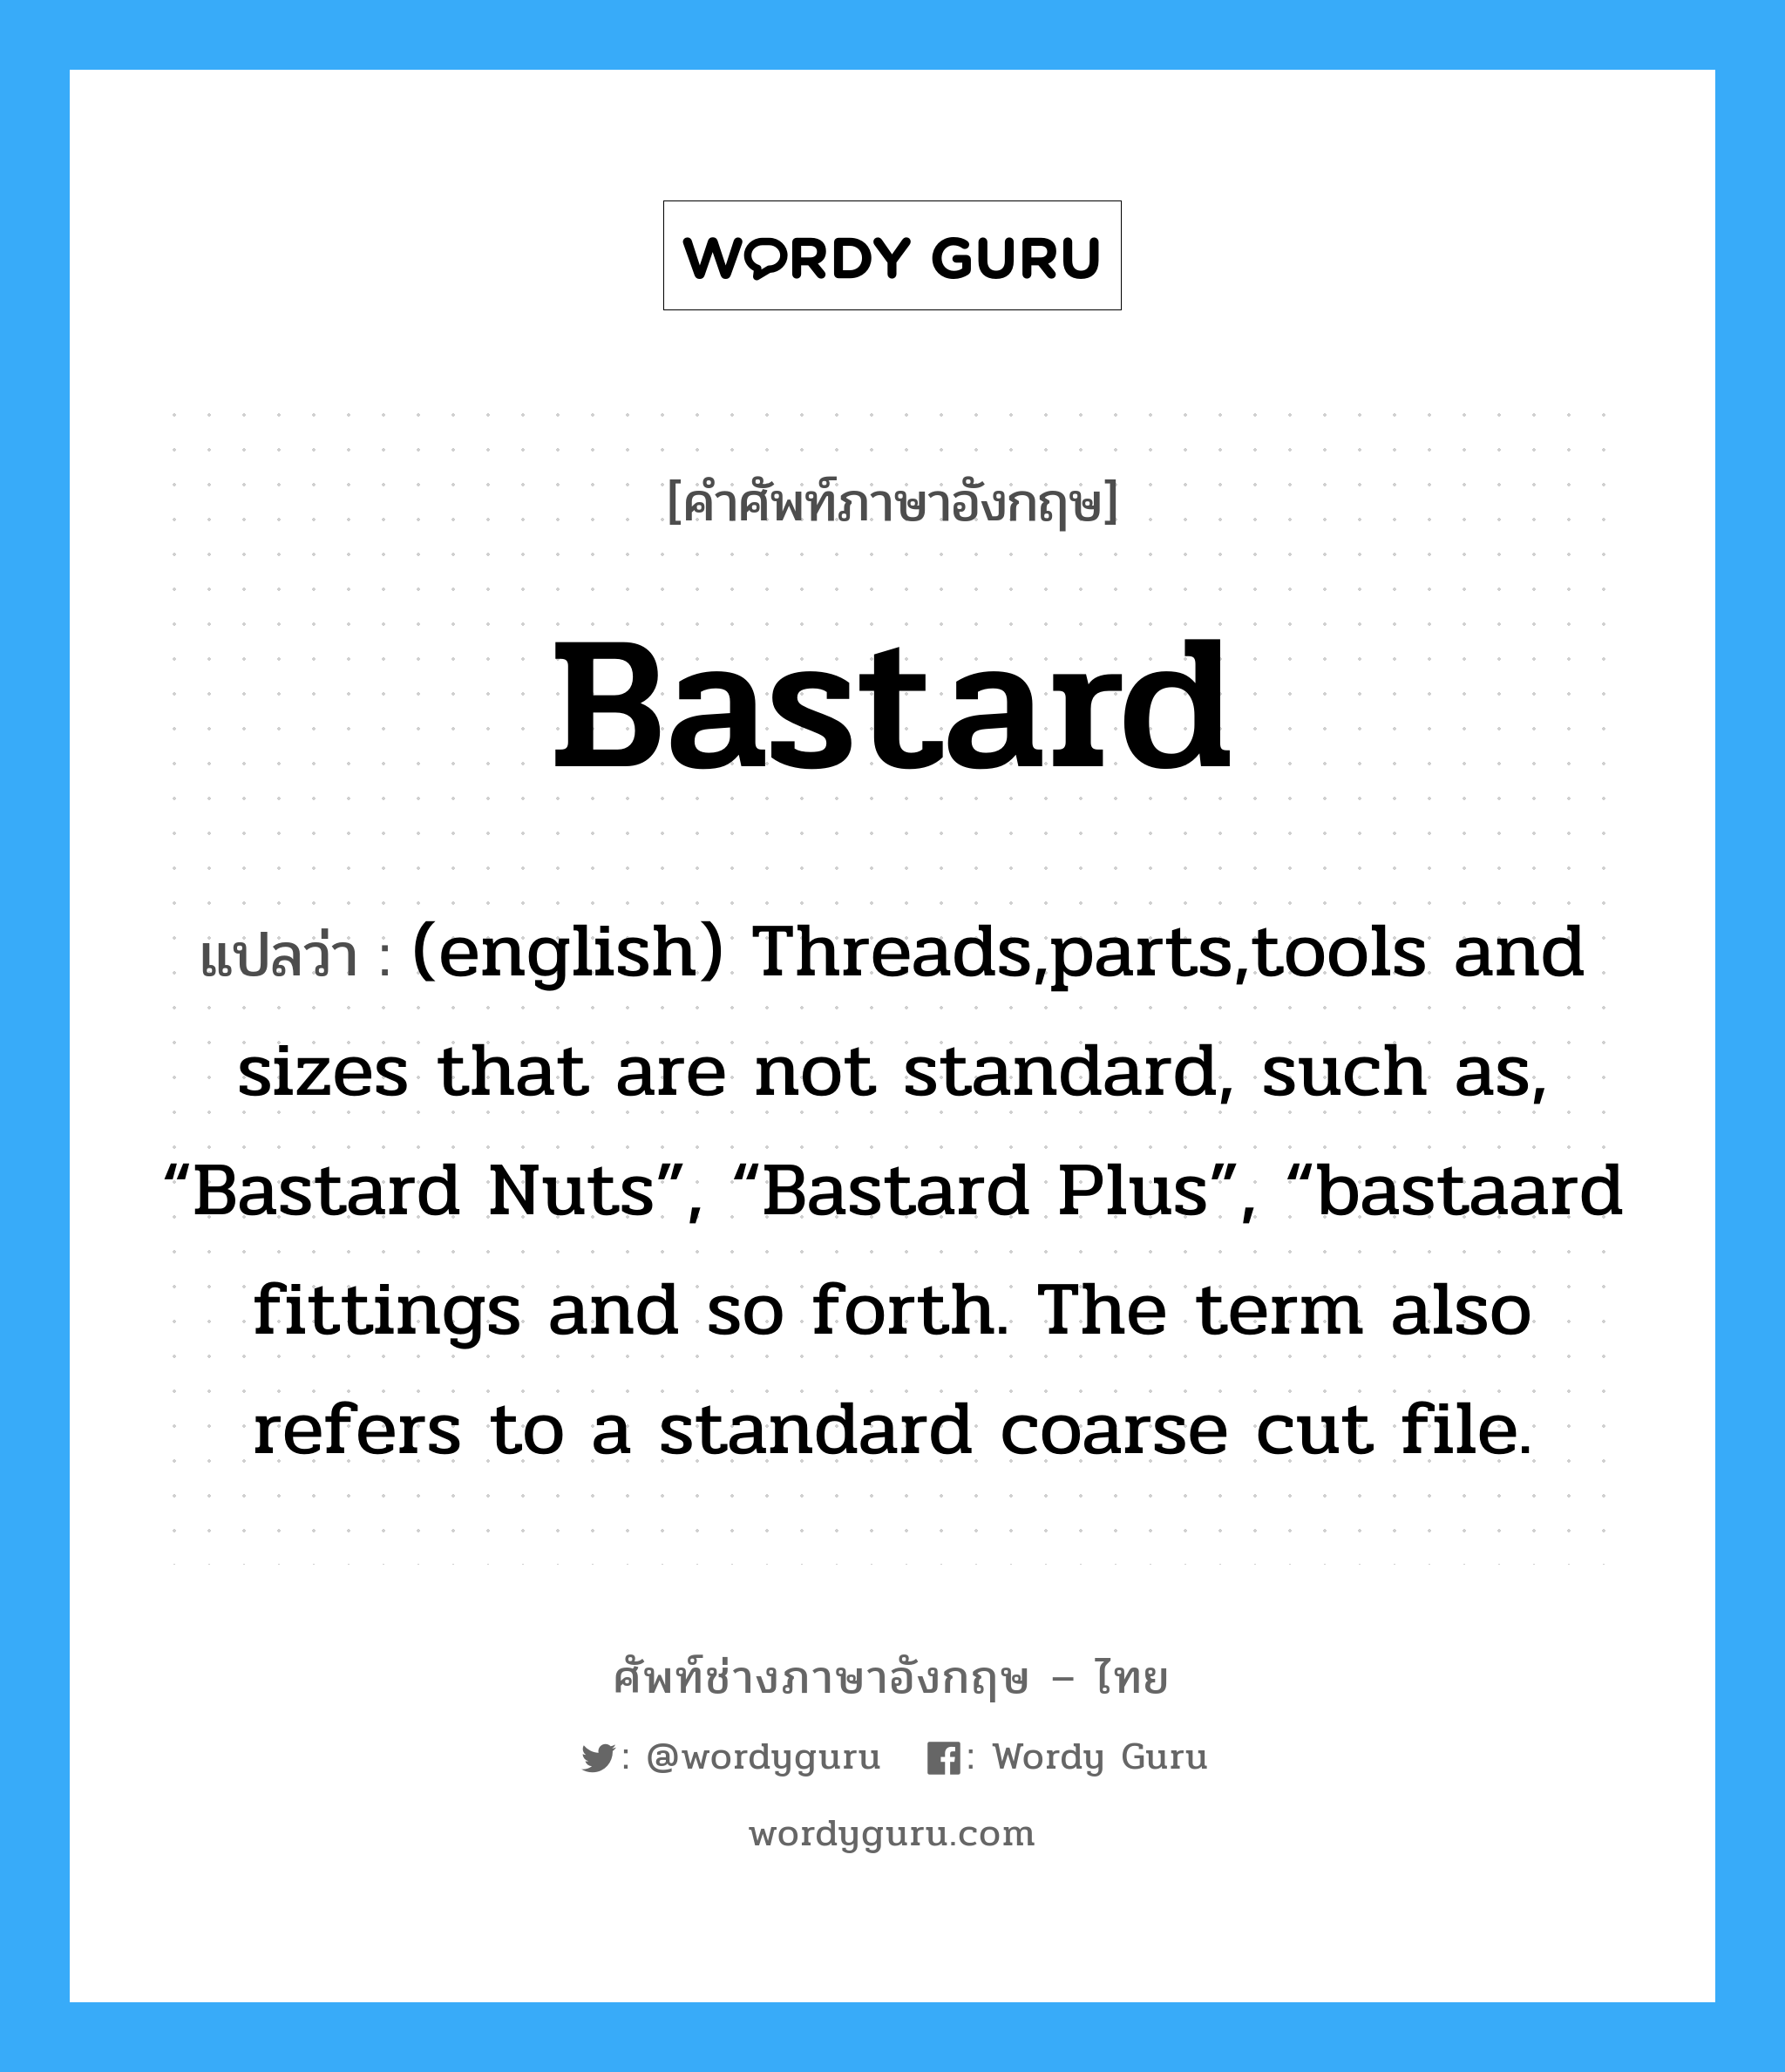 Bastard แปลว่า?, คำศัพท์ช่างภาษาอังกฤษ - ไทย Bastard คำศัพท์ภาษาอังกฤษ Bastard แปลว่า (english) Threads,parts,tools and sizes that are not standard, such as, “Bastard Nuts”, “Bastard Plus”, “bastaard fittings and so forth. The term also refers to a standard coarse cut file.